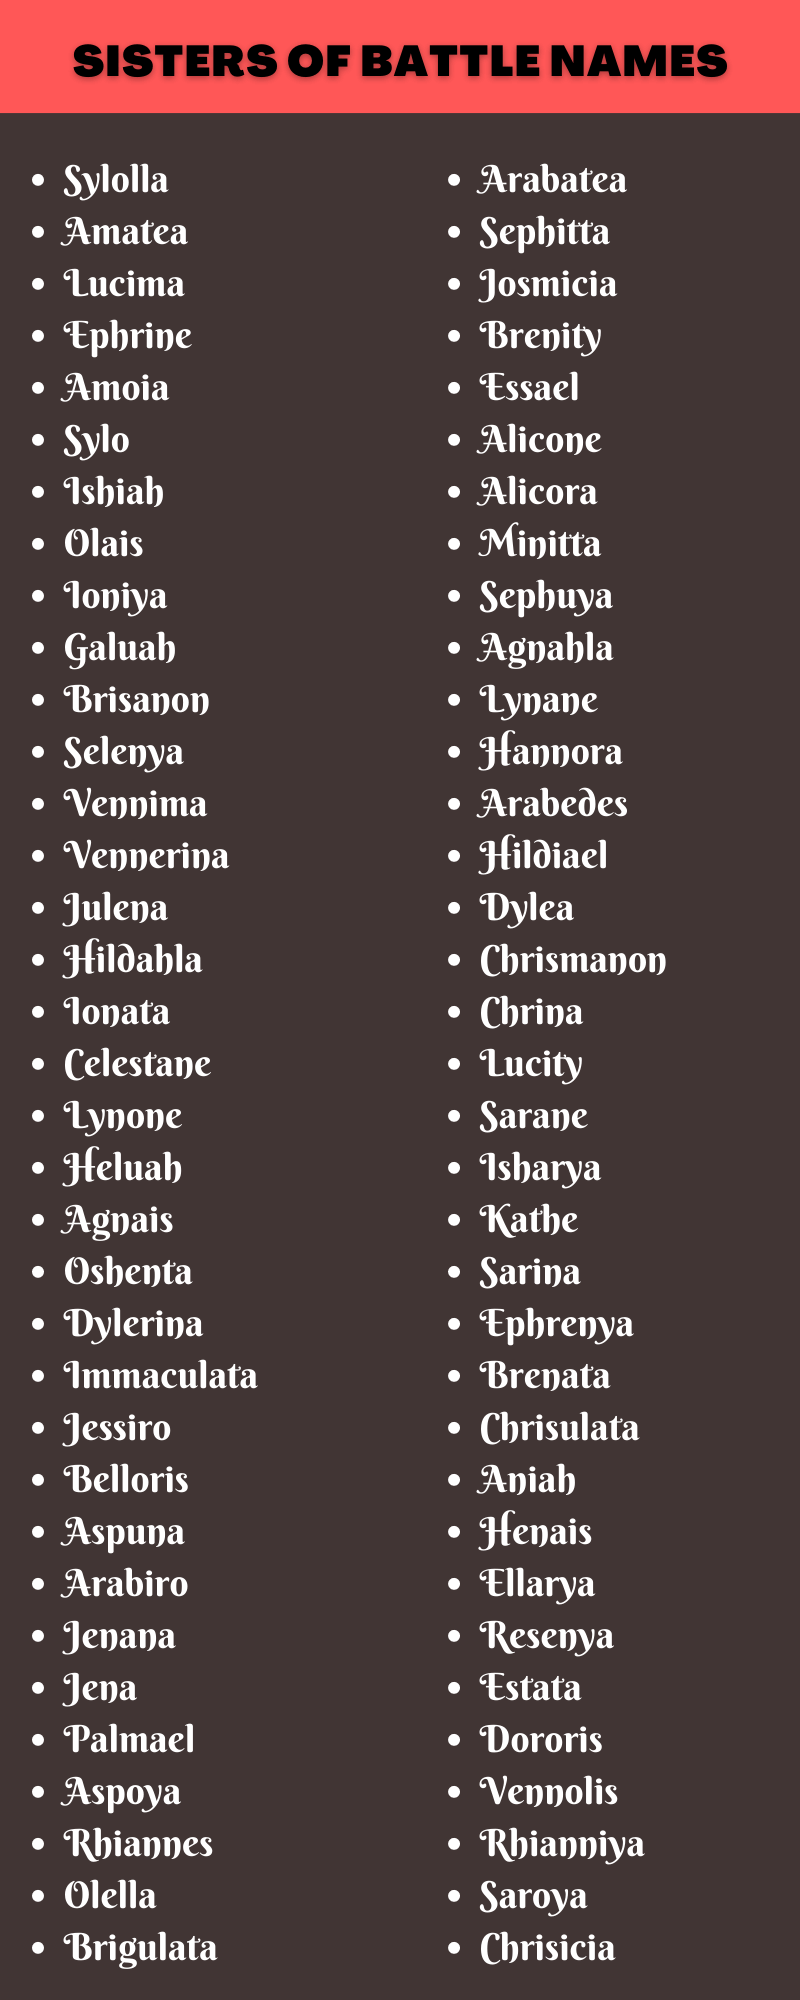 Sisters of Battle Names